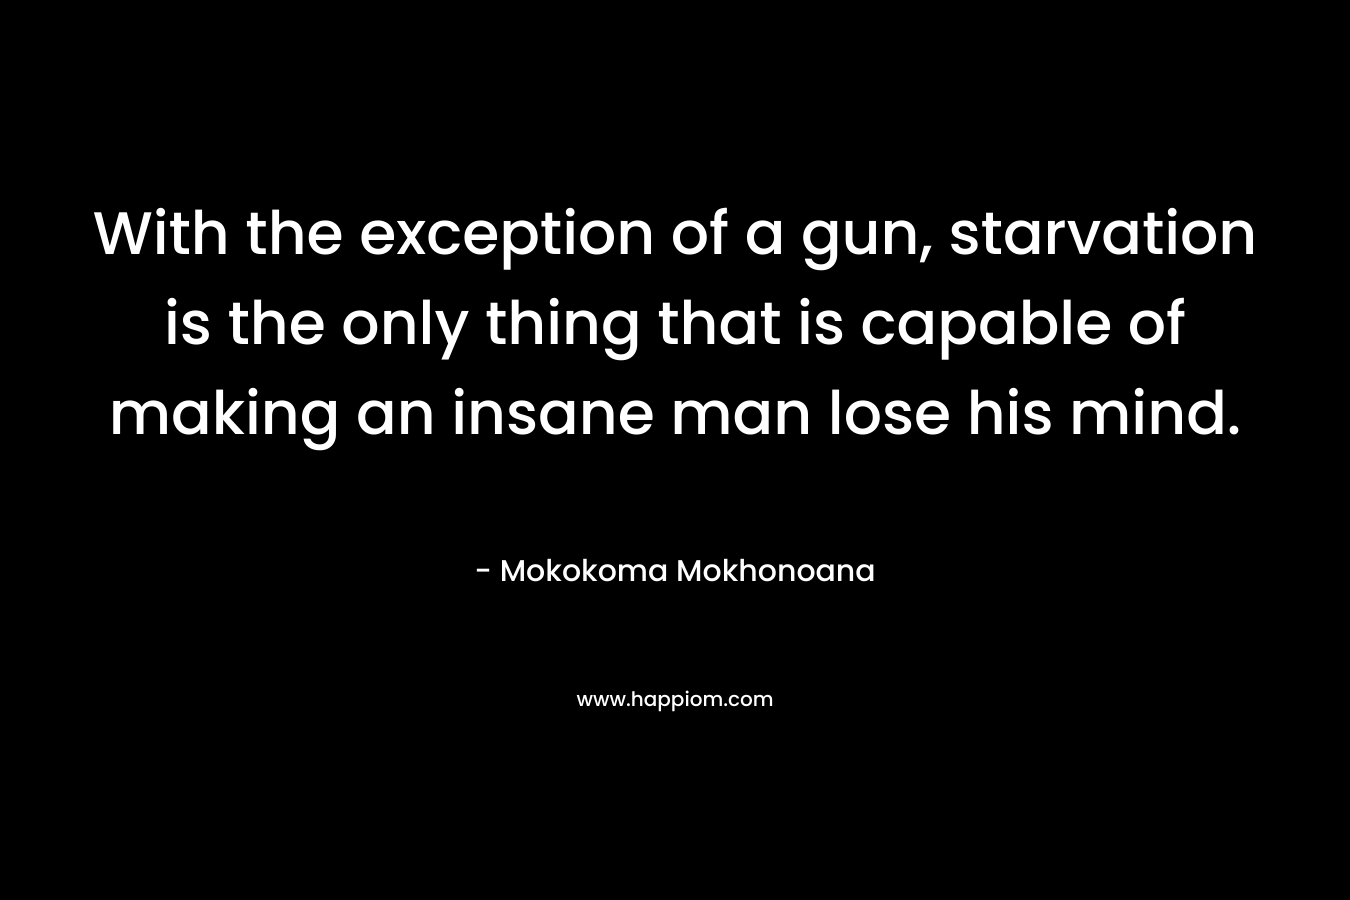 With the exception of a gun, starvation is the only thing that is capable of making an insane man lose his mind. – Mokokoma Mokhonoana